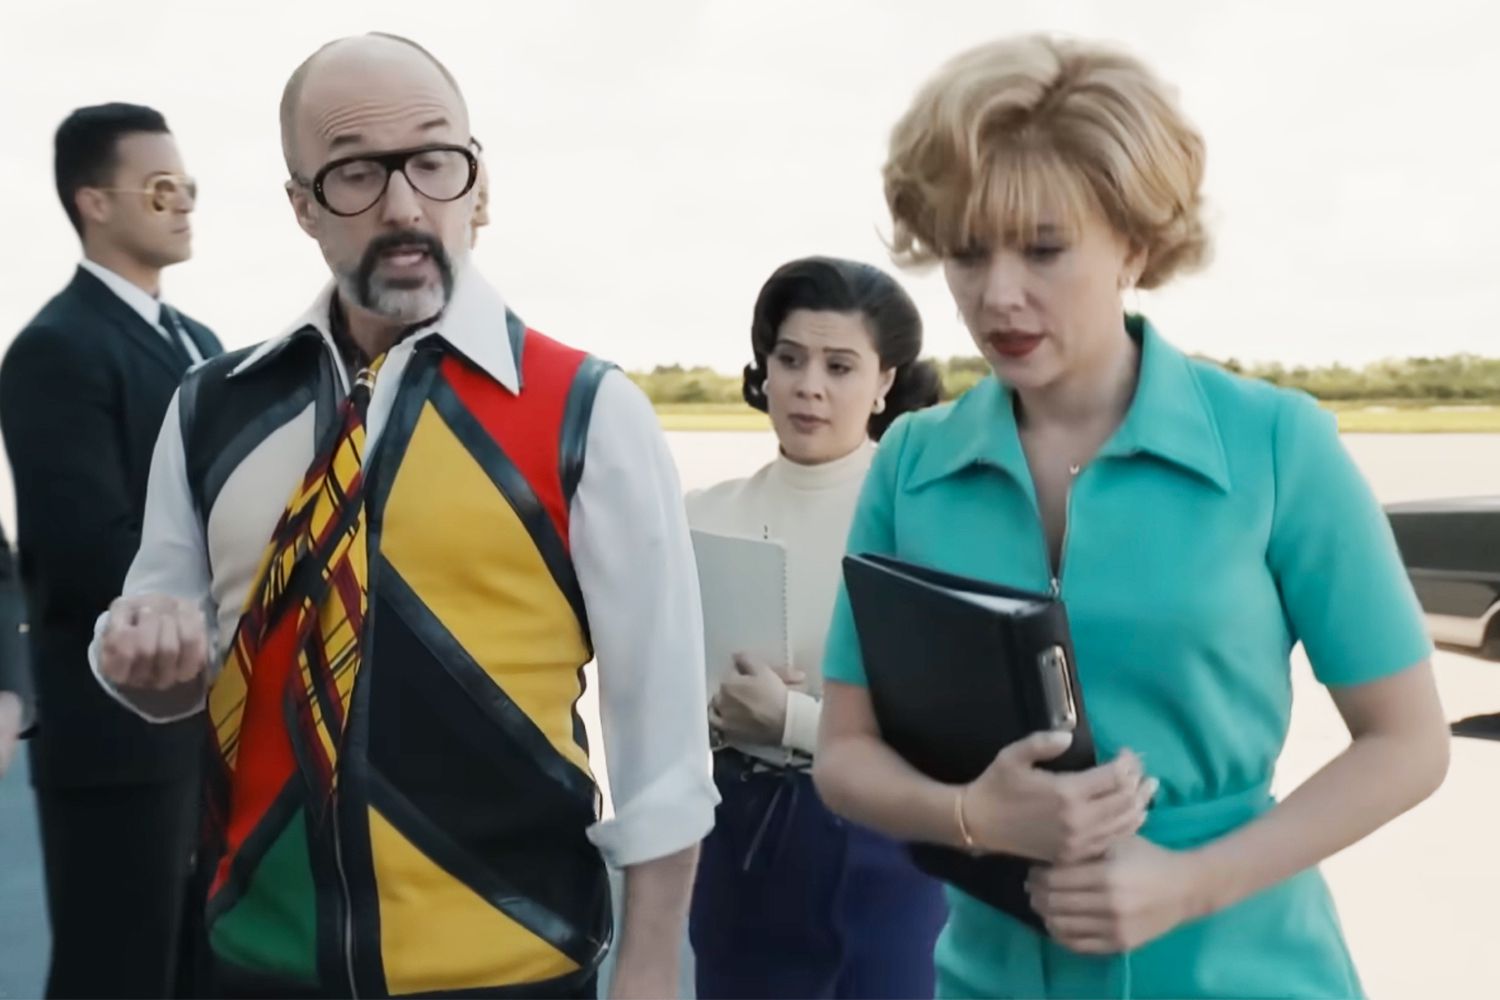 Jim Rash and Scarlett Johansson in 'Fly Me to the Moon'